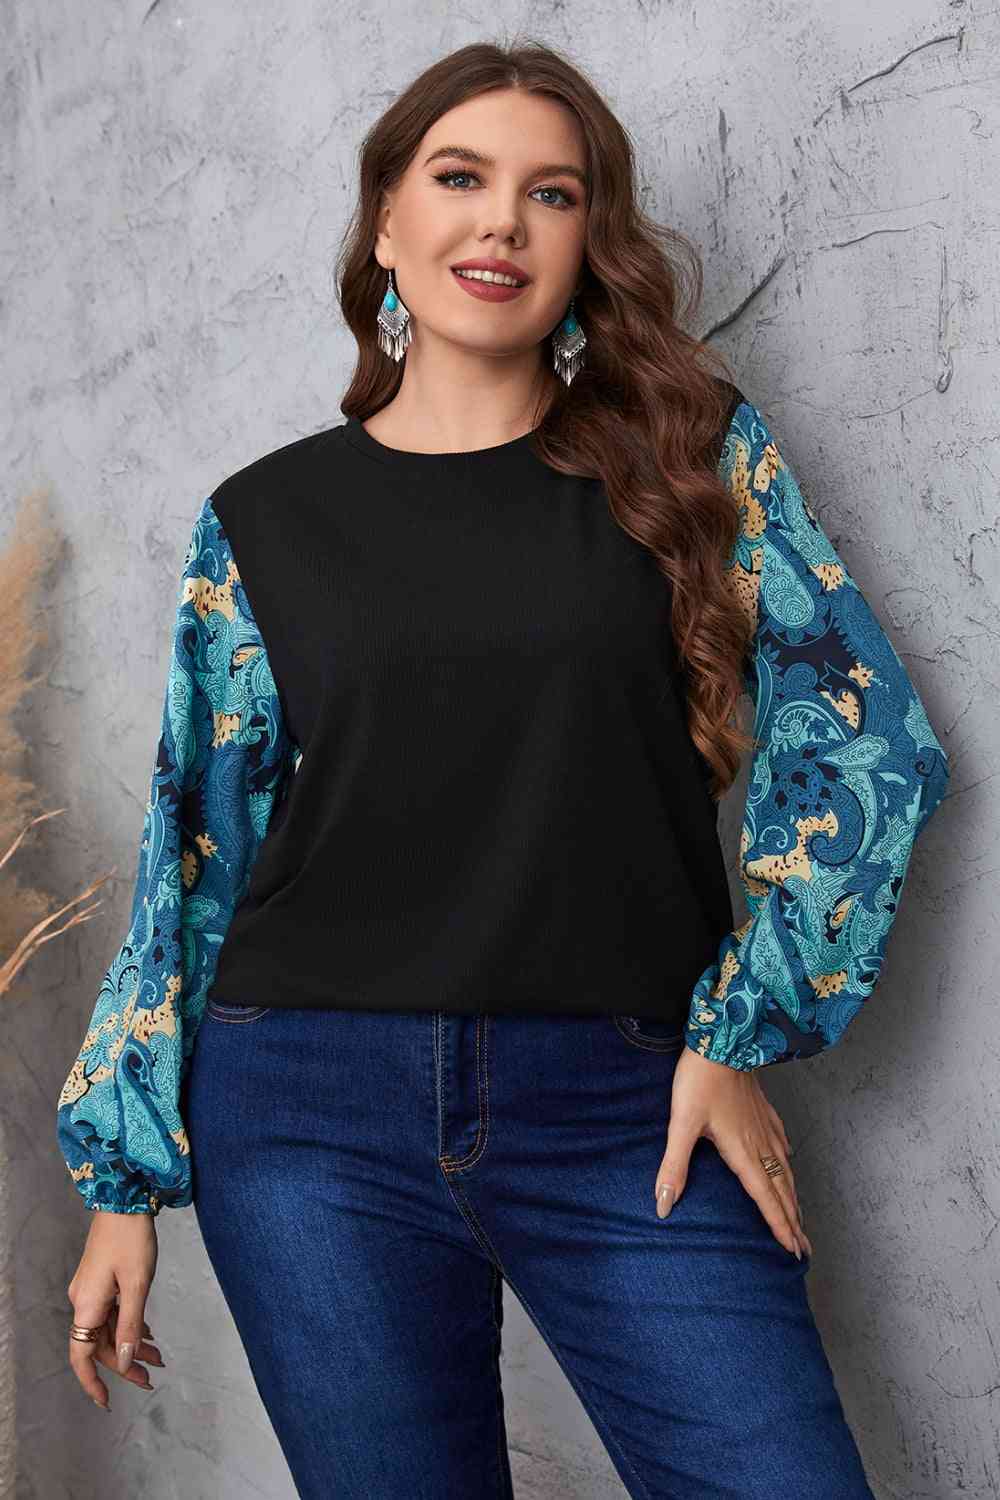 Melo Apparel Plus Size Printed Sleeve Round Neck Blouse